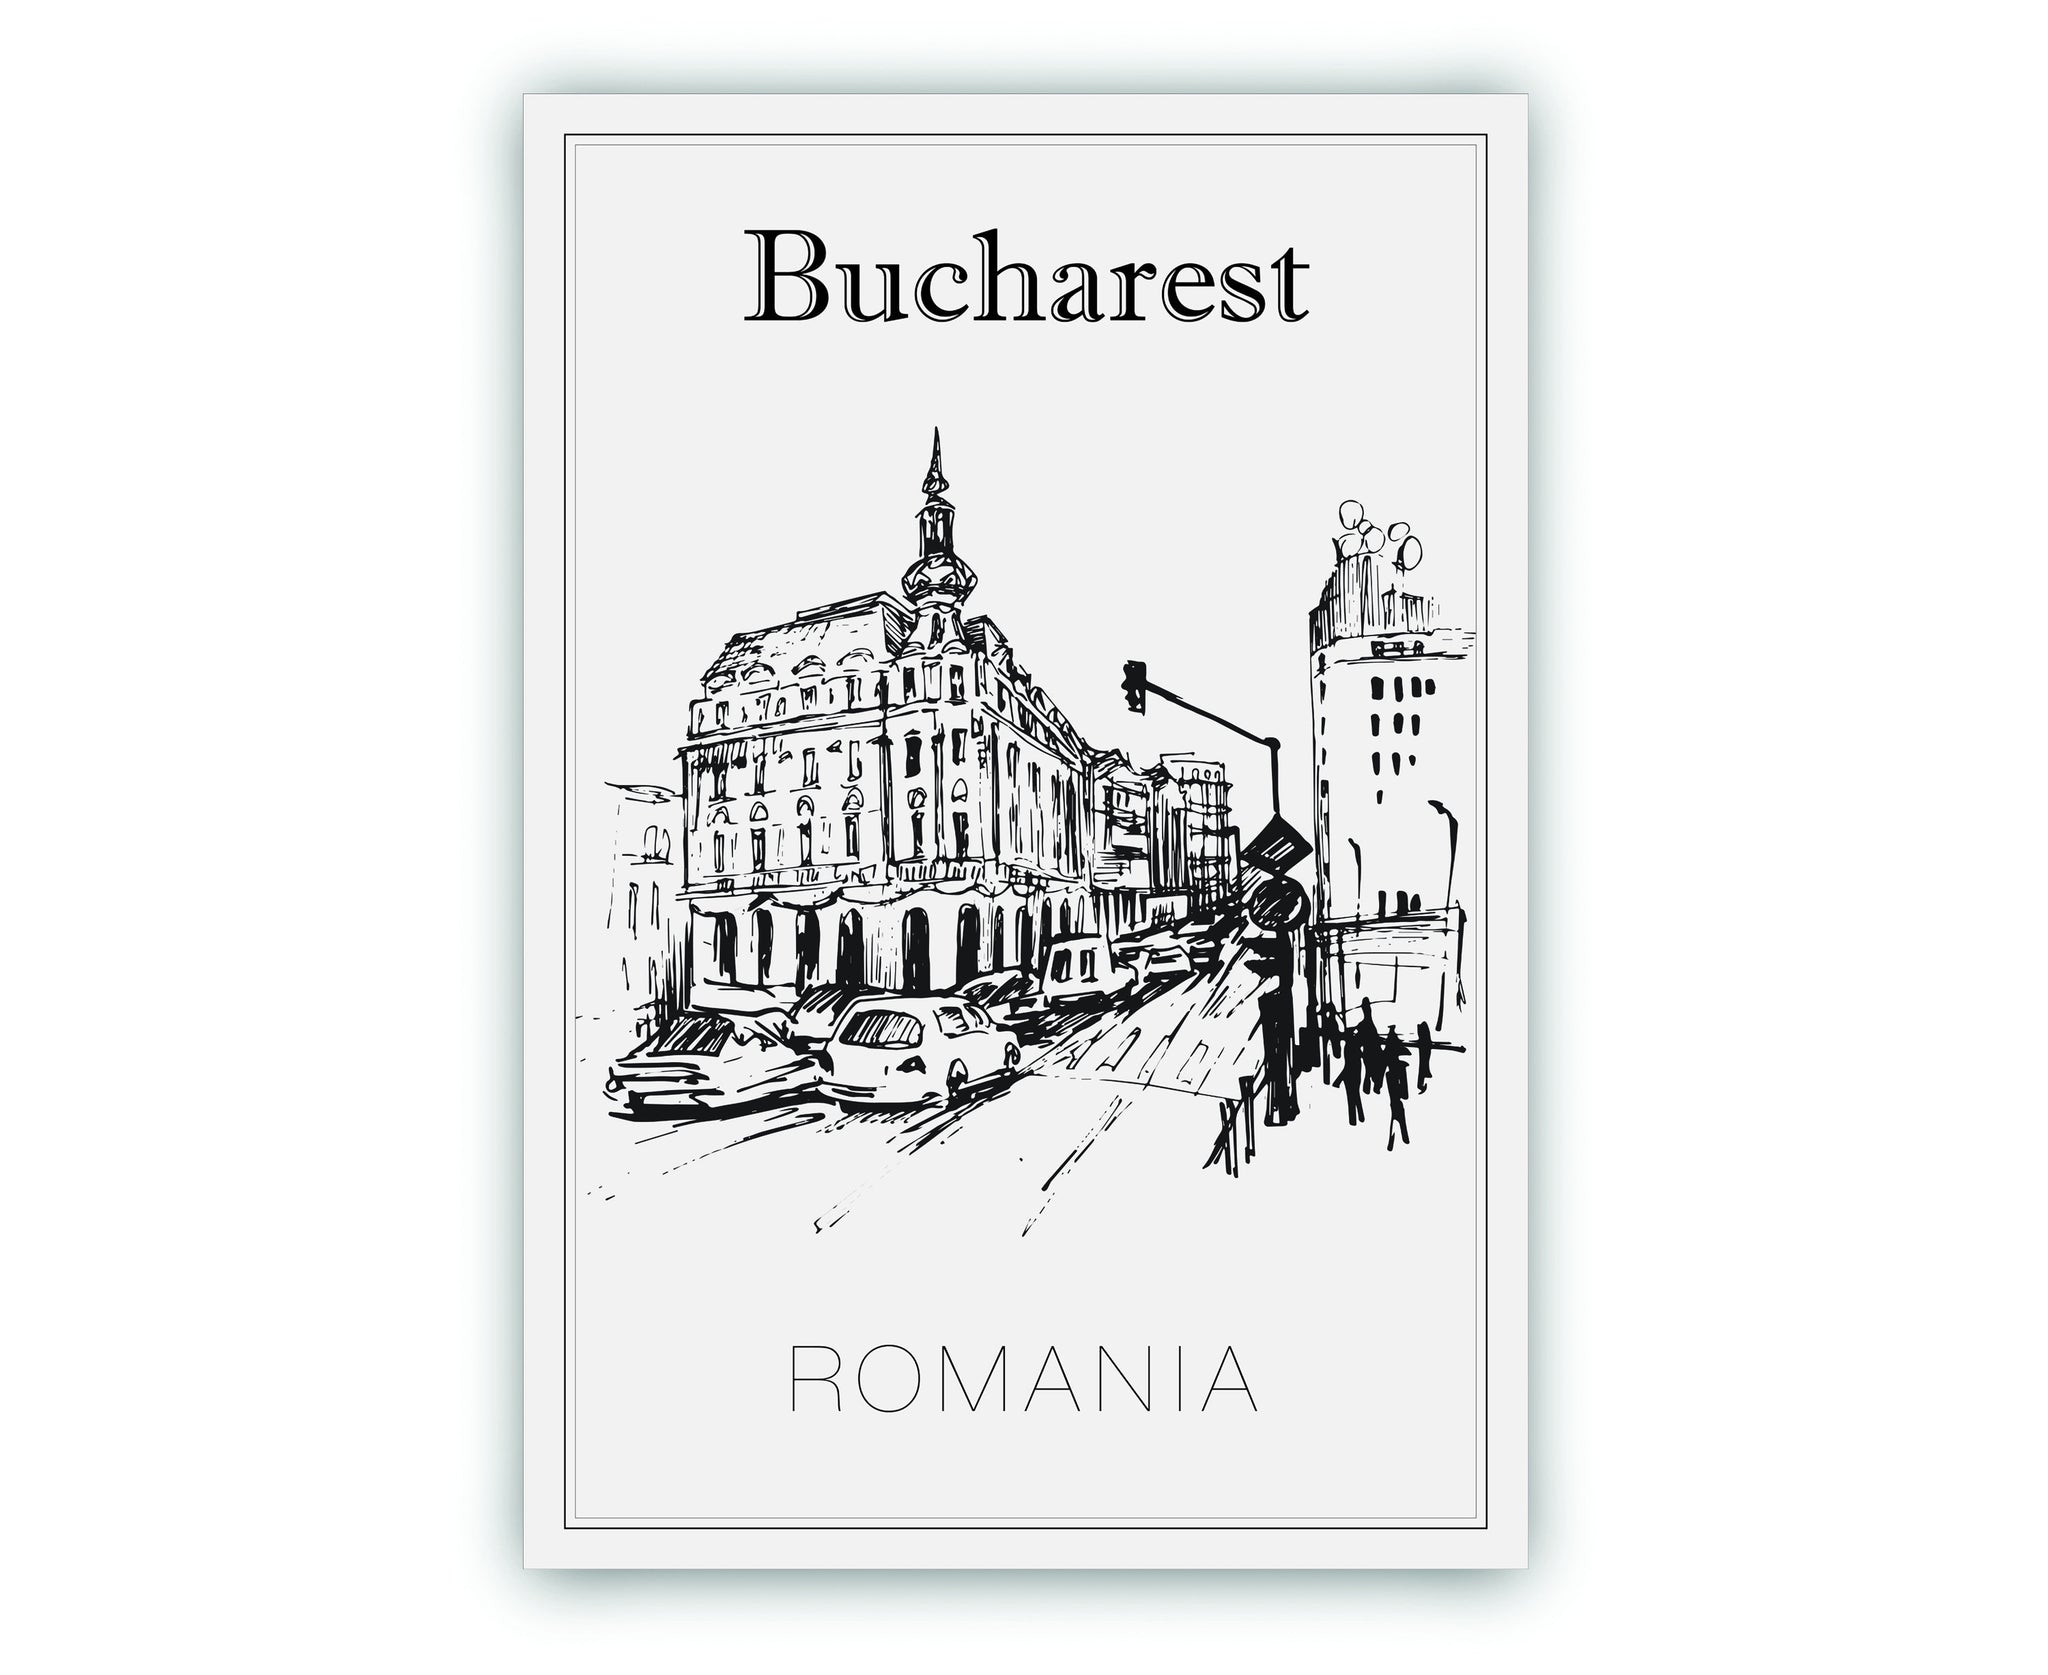 Hand Drawn Poster, Bucharest Travel Poster, Romania Poster Wall Art, Bucharest Cityscape and Landmark Map, City Map Poster For Home, Office